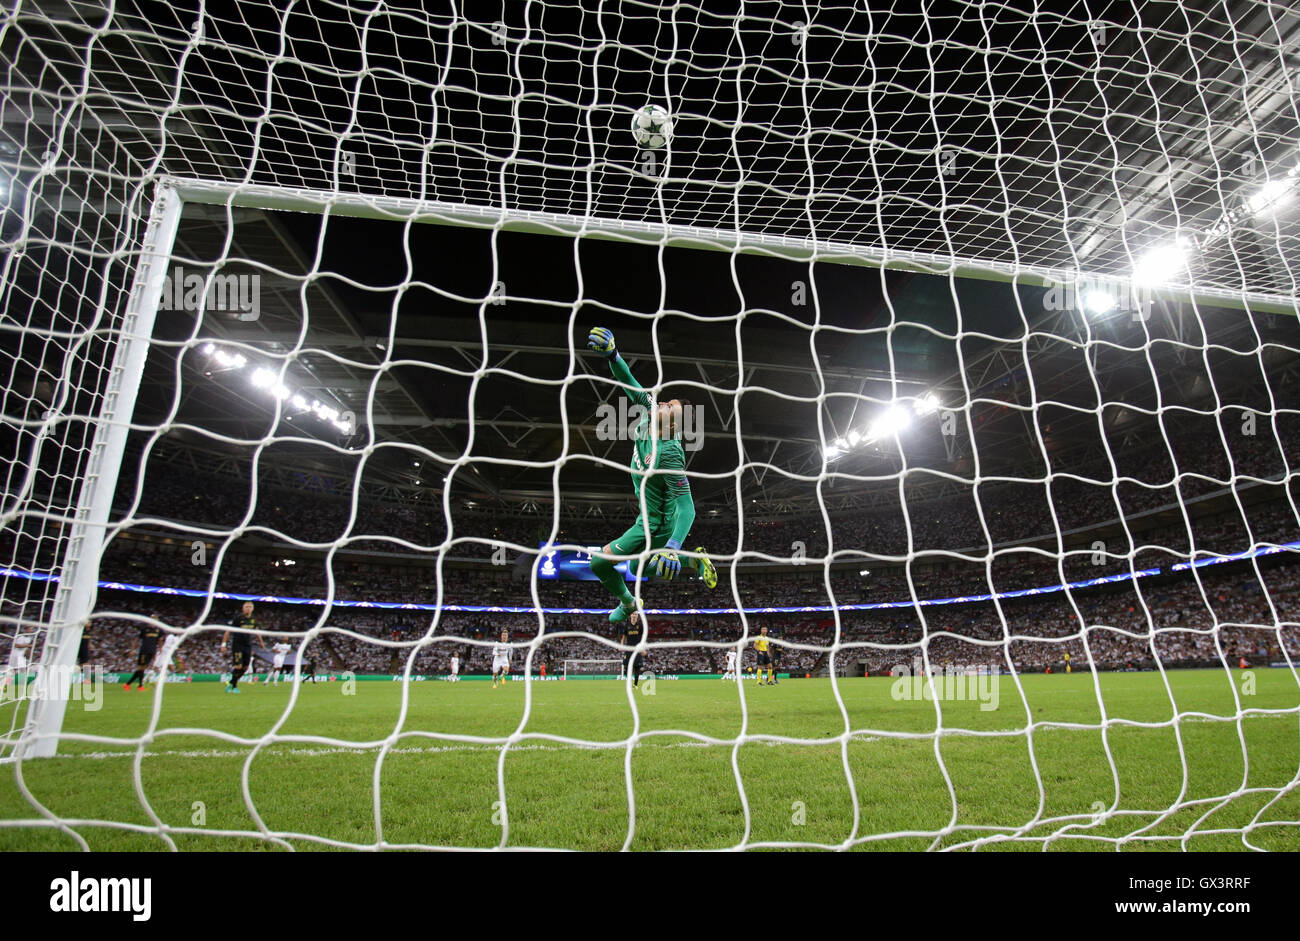 AS Monaco goalkeeper Danijel Subasic deflects a shot during the Champions League match at the Wembley Stadium, London. PRESS ASSOCIATION Photo. Picture date:  Wednesday September 14, 2016. See PA story SOCCER Tottenham. Photo credit should read: Yui Mok/PA Wire Stock Photo